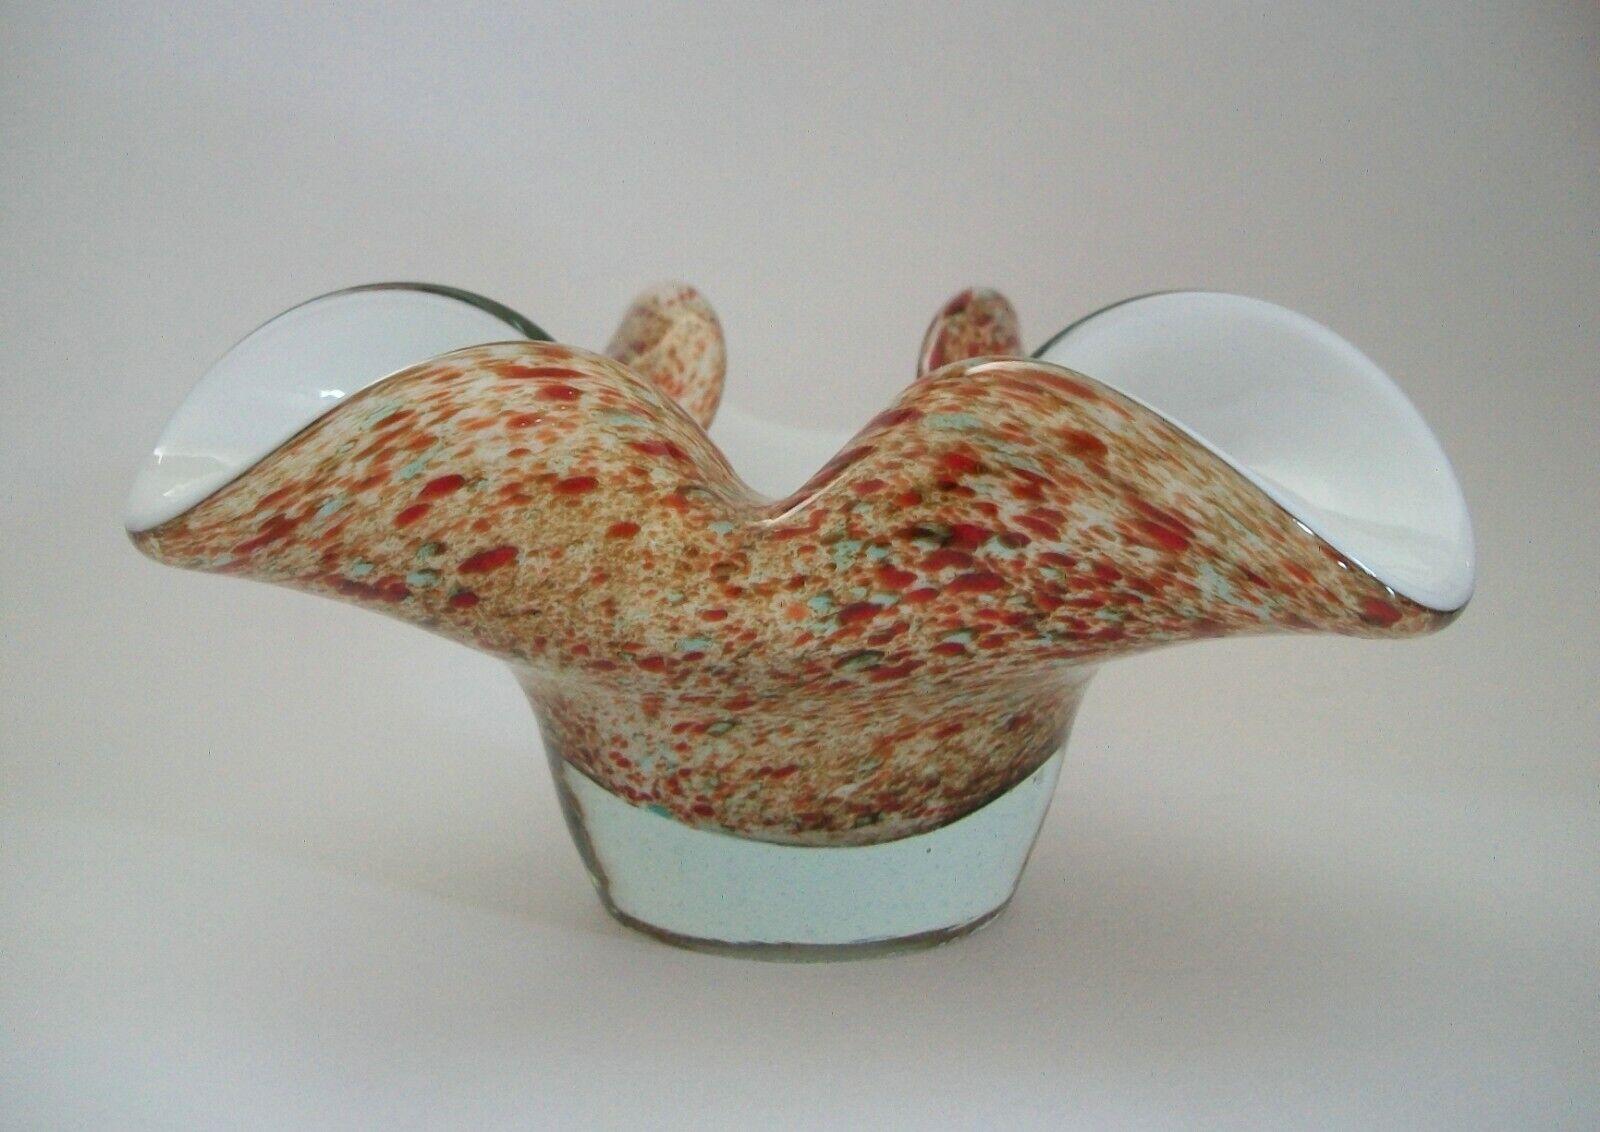 Murano Mid Century Modern studio glass trefoil form bowl - clear glass with speckles to the exterior (red and turquoise) - solid white glass to the interior - frosted glass base - unsigned (no label) - Italy - circa 1970's.

Excellent/mint vintage